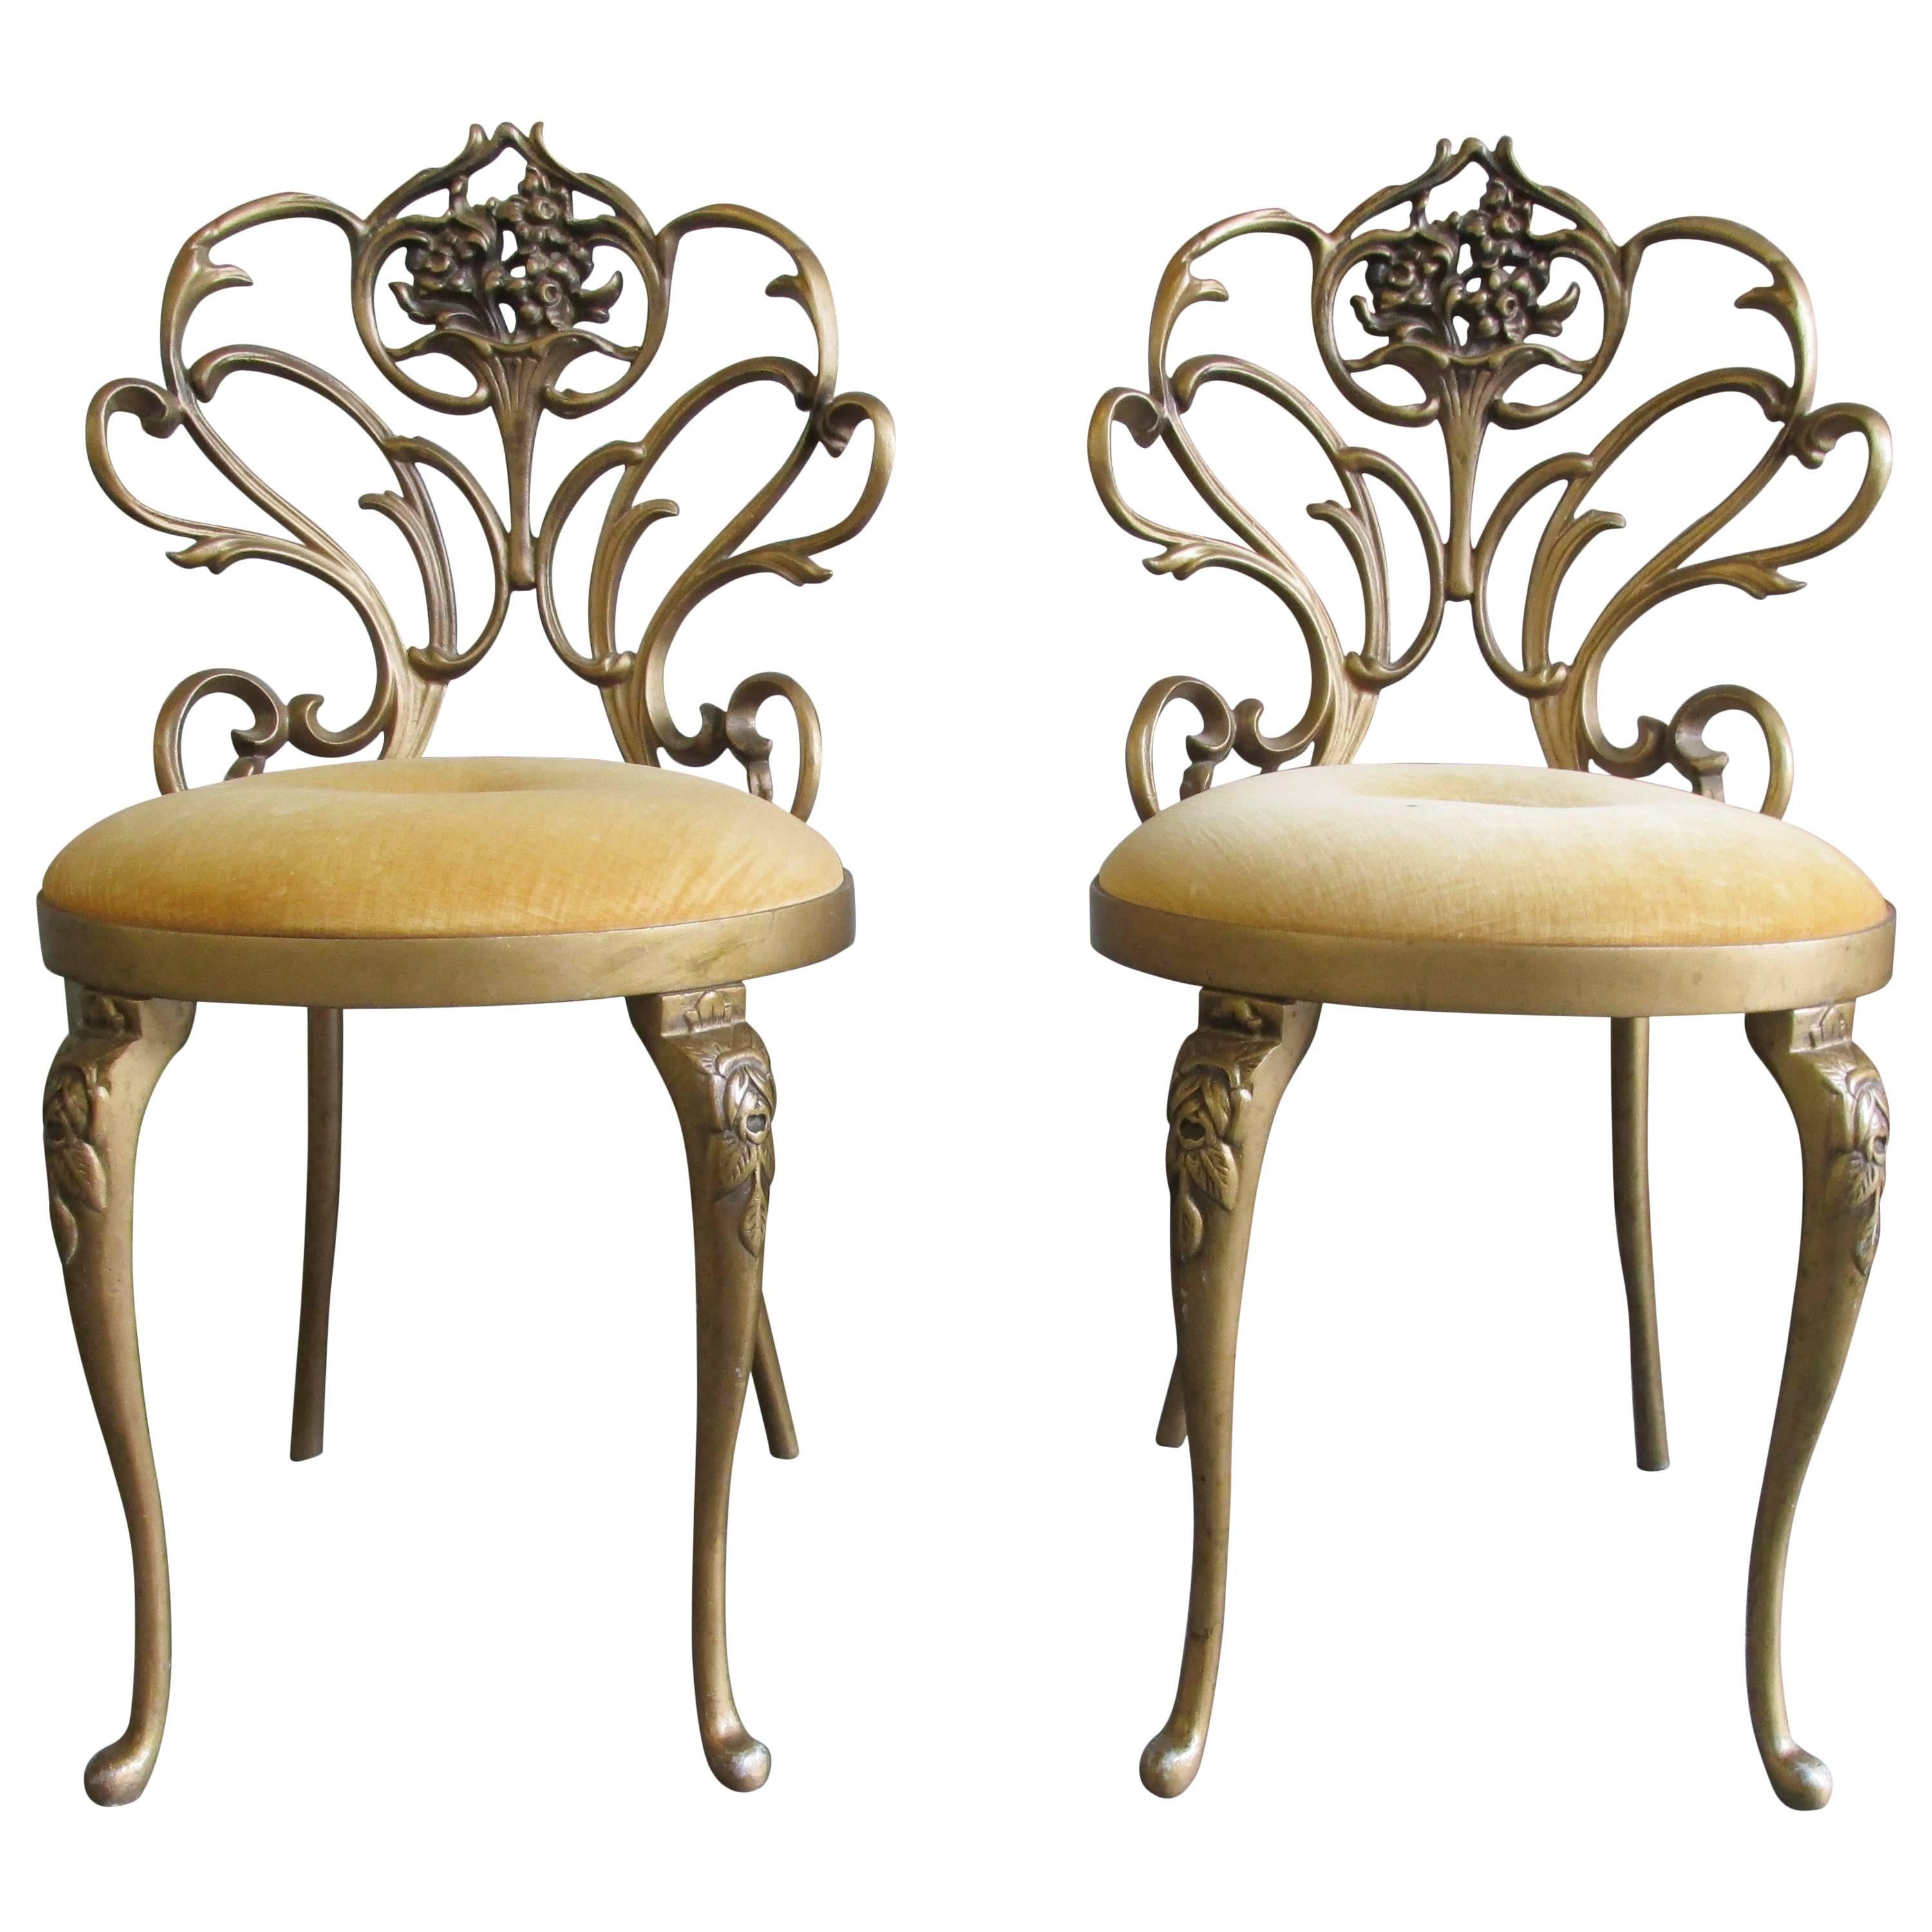 Pair of Cast Iron Hollywood Regency Chairs